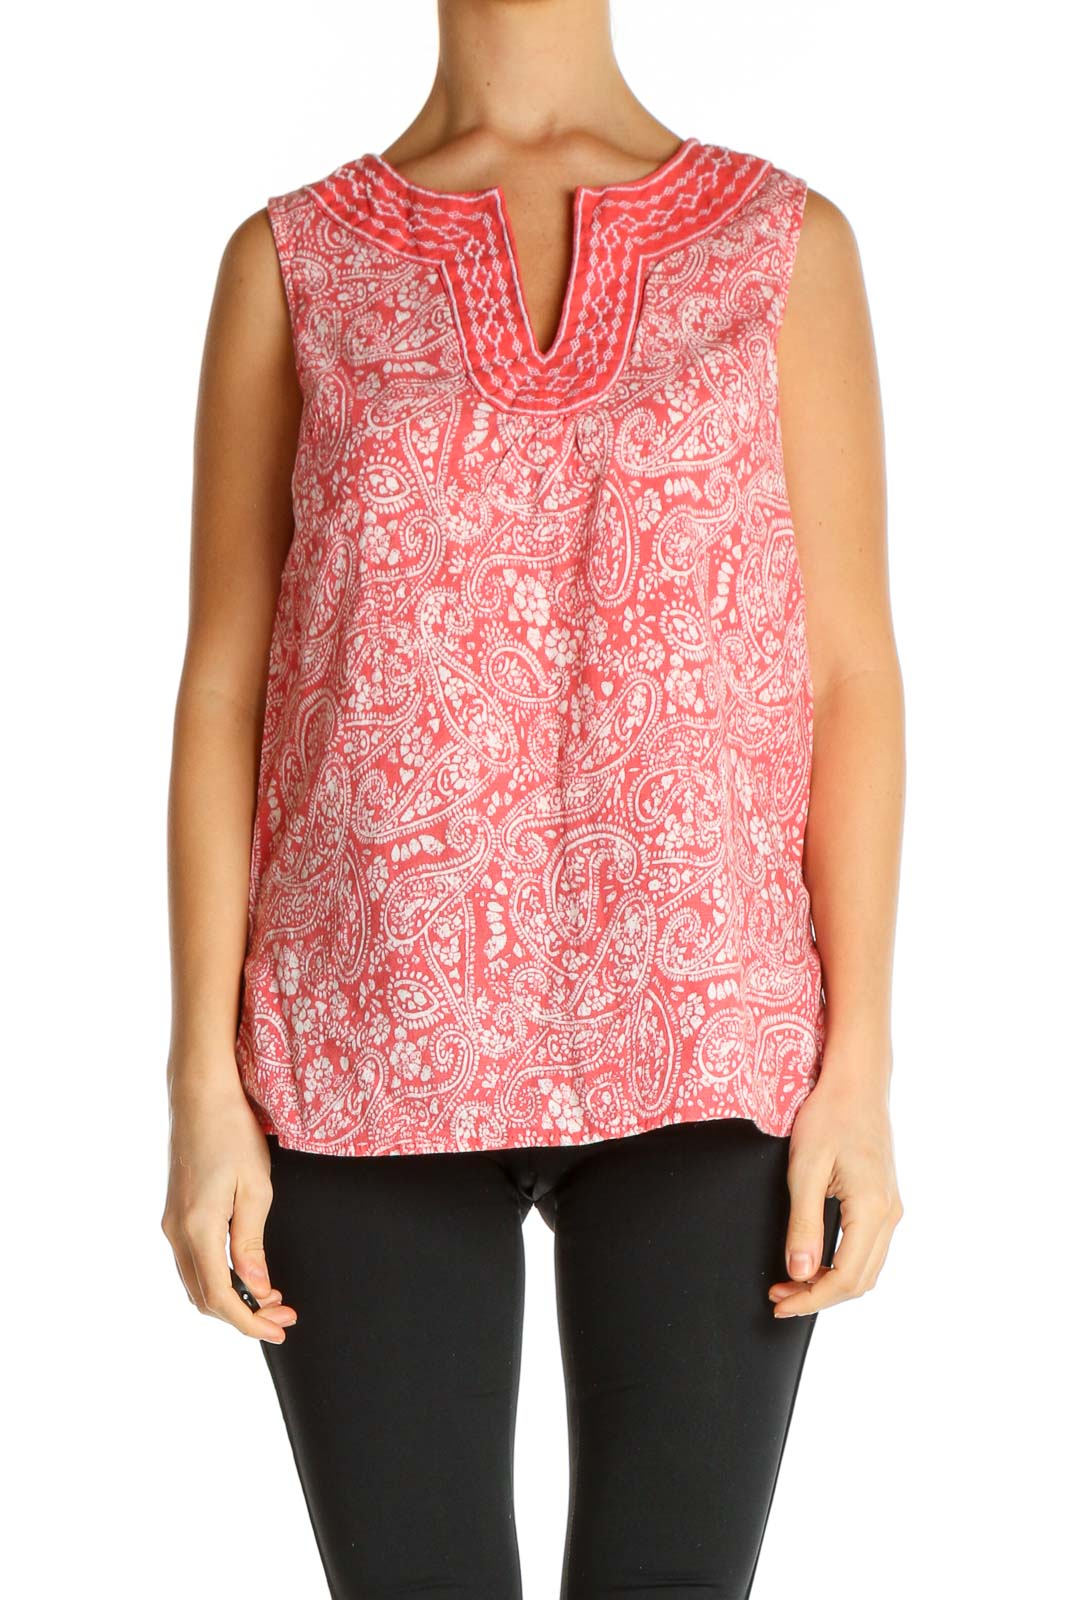 Pink Floral Print All Day Wear Blouse Front